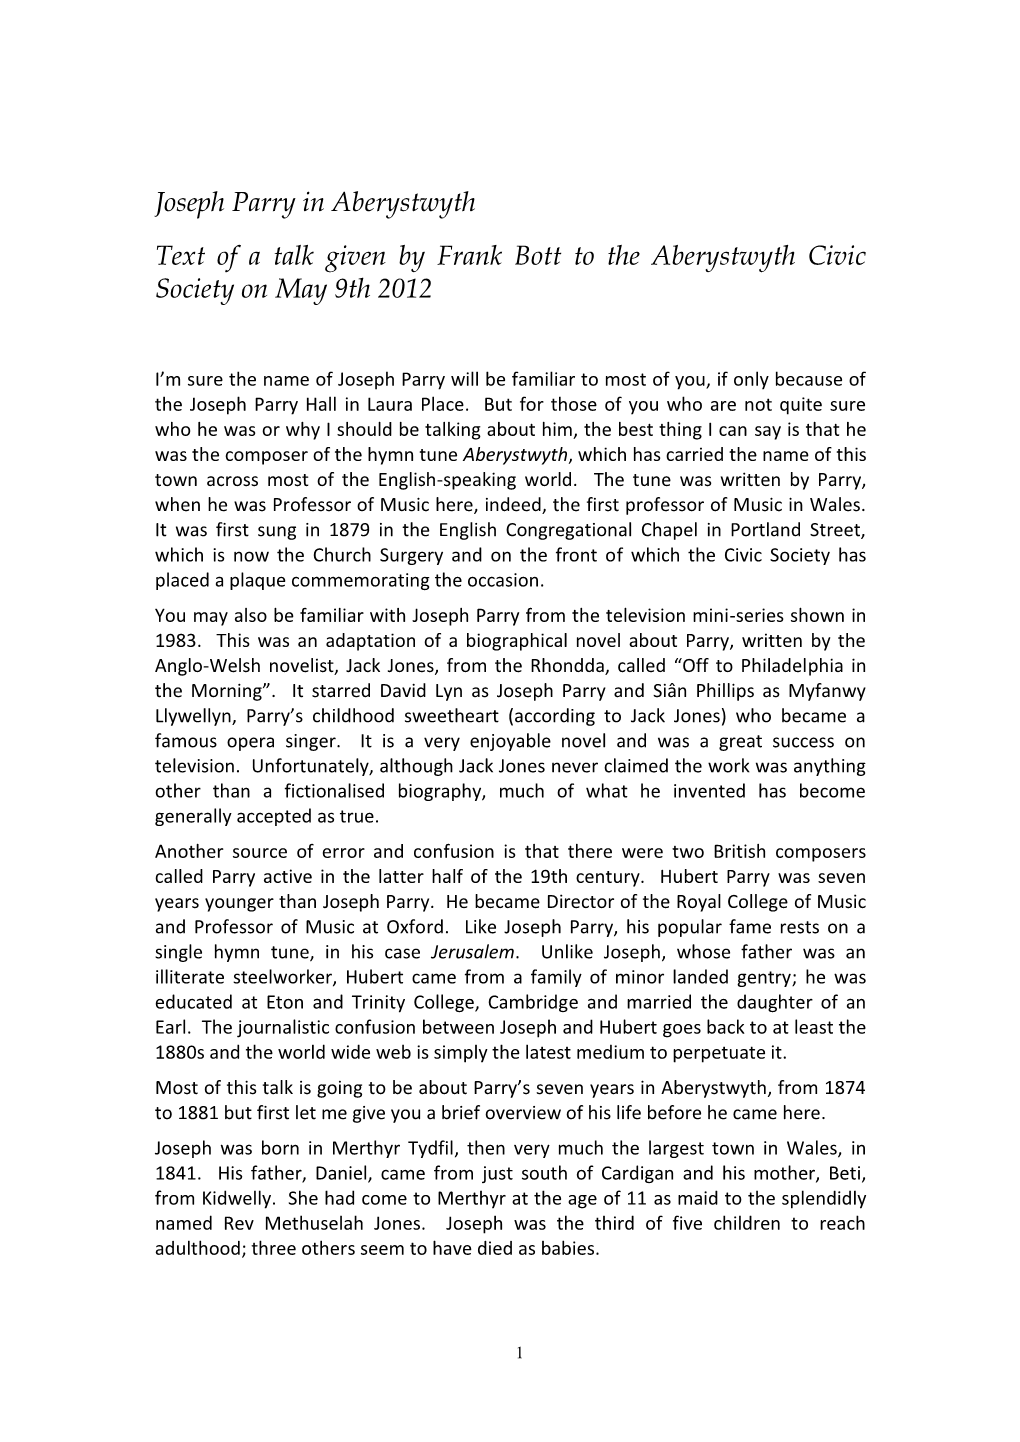 Joseph Parry in Aberystwyth Text of a Talk Given by Frank Bott to the Aberystwyth Civic Society on May 9Th 2012